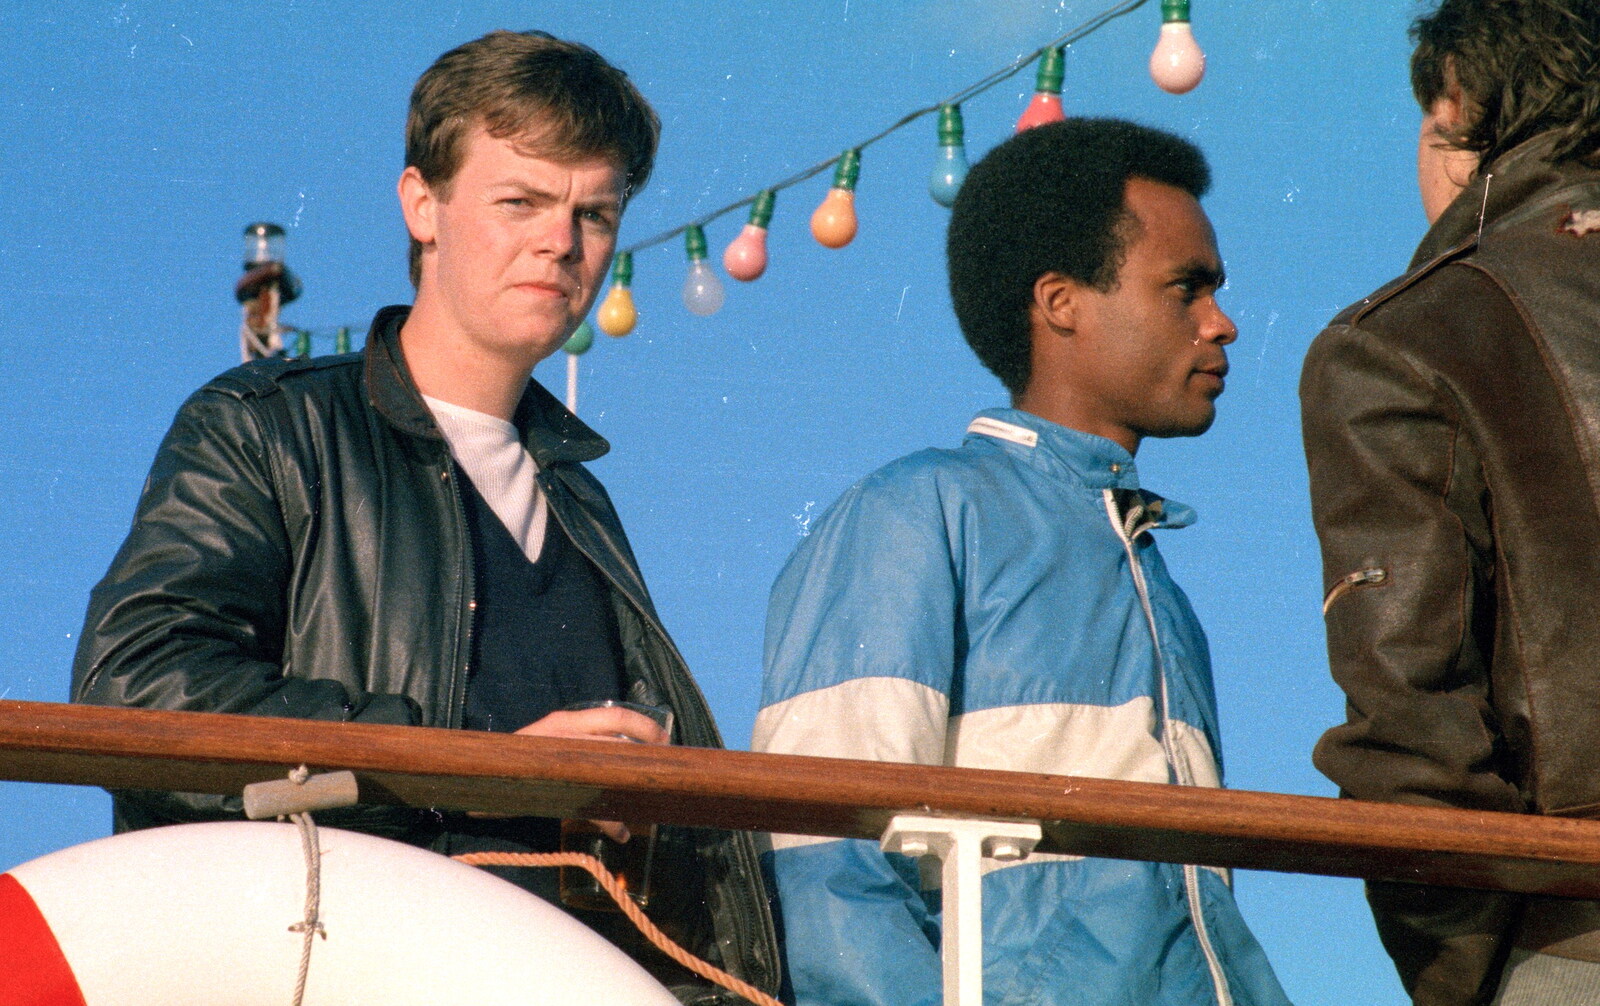 Dave Lock and Simon Bento from Uni: A Student Booze Cruise, Plymouth Sound, Devon - 2nd May 1986